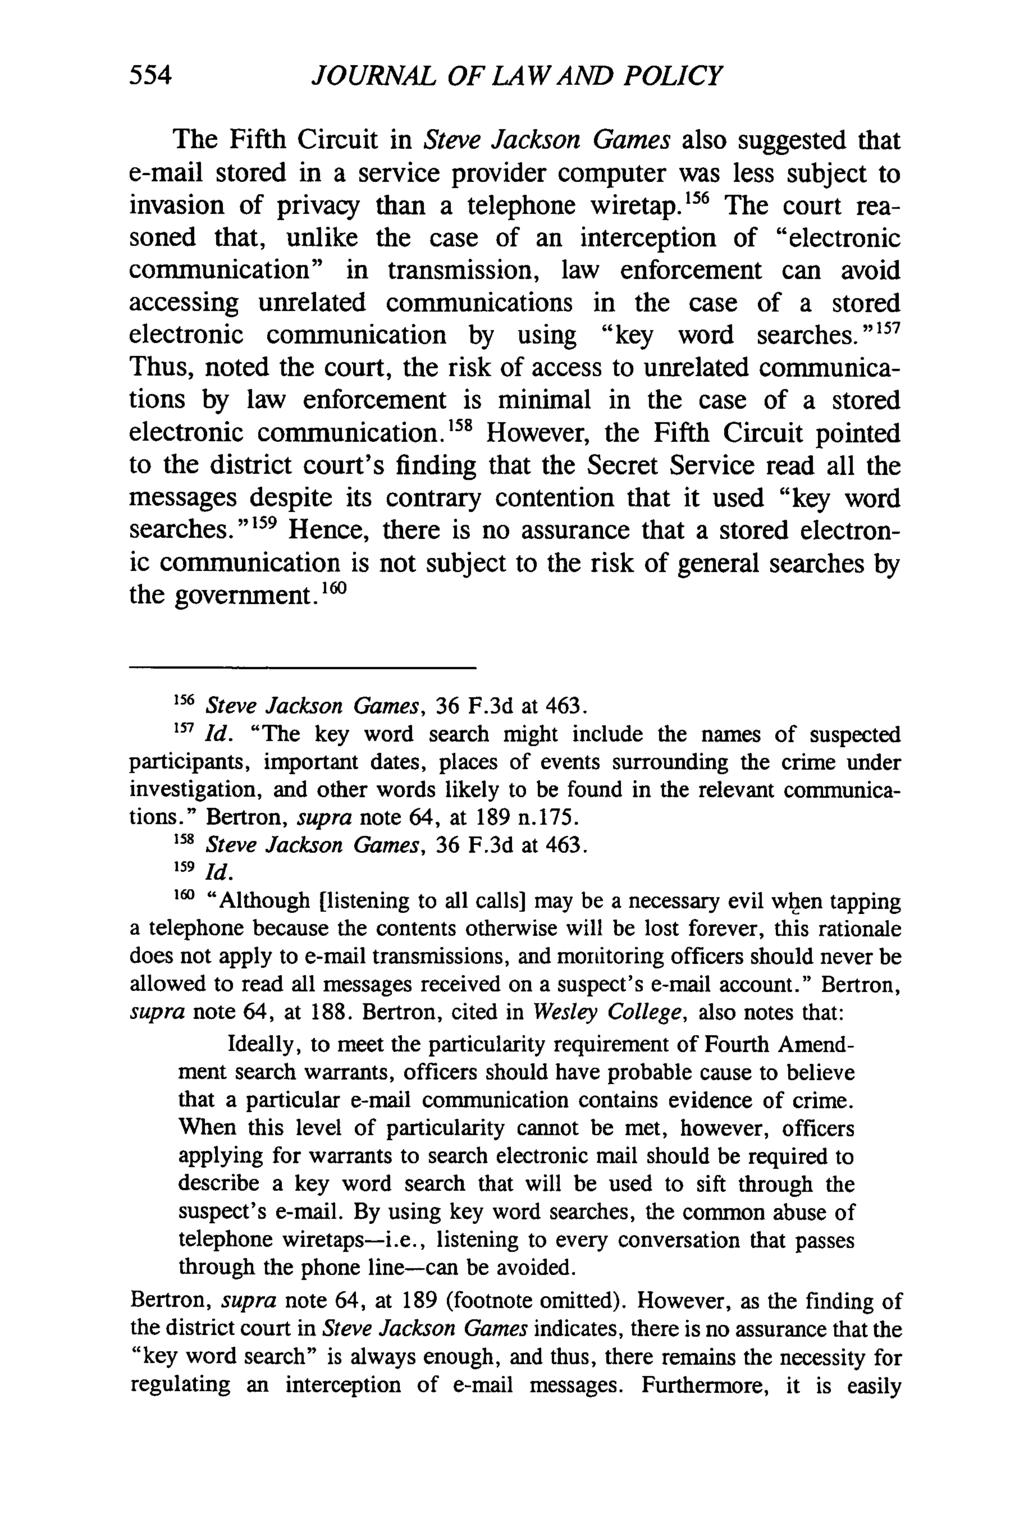 JOURNAL OF LAW AND POLICY The Fifth Circuit in Steve Jackson Games also suggested that e-mail stored in a service provider computer was less subject to invasion of privacy than a telephone wiretap.